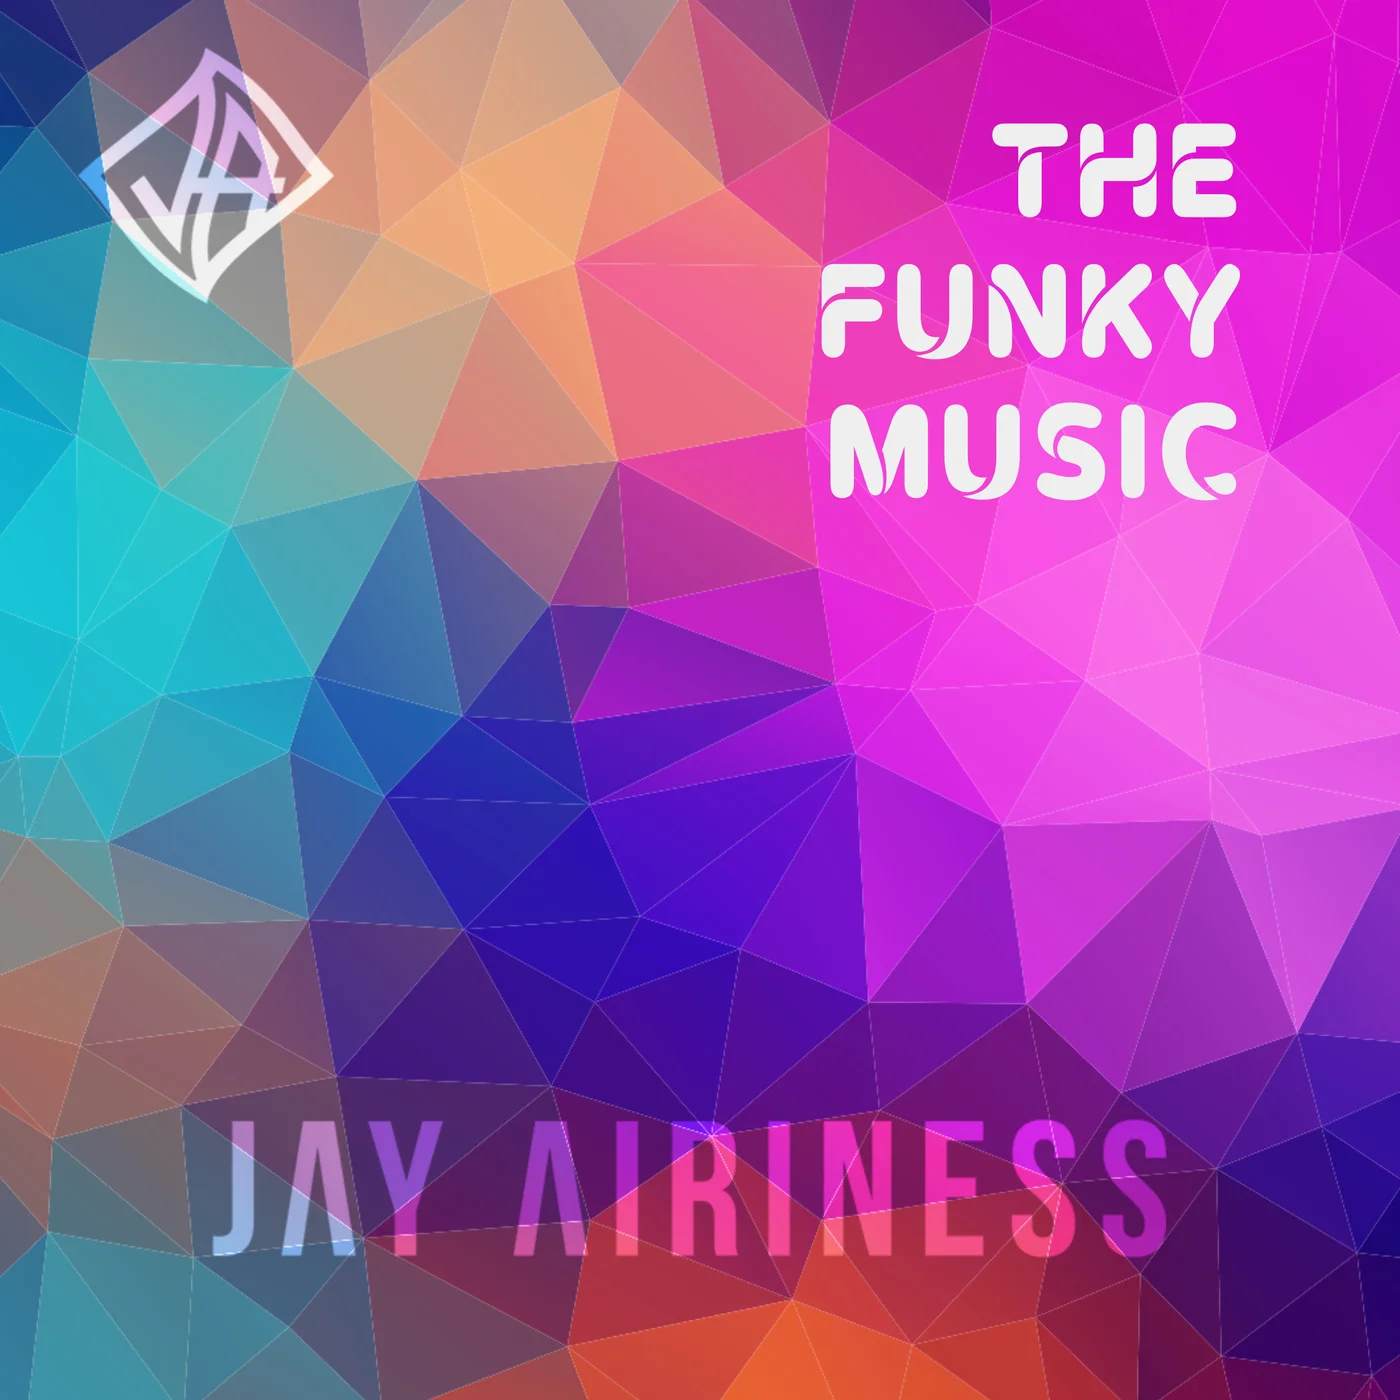 Jay Airiness - The Funky Music (Original Mix)